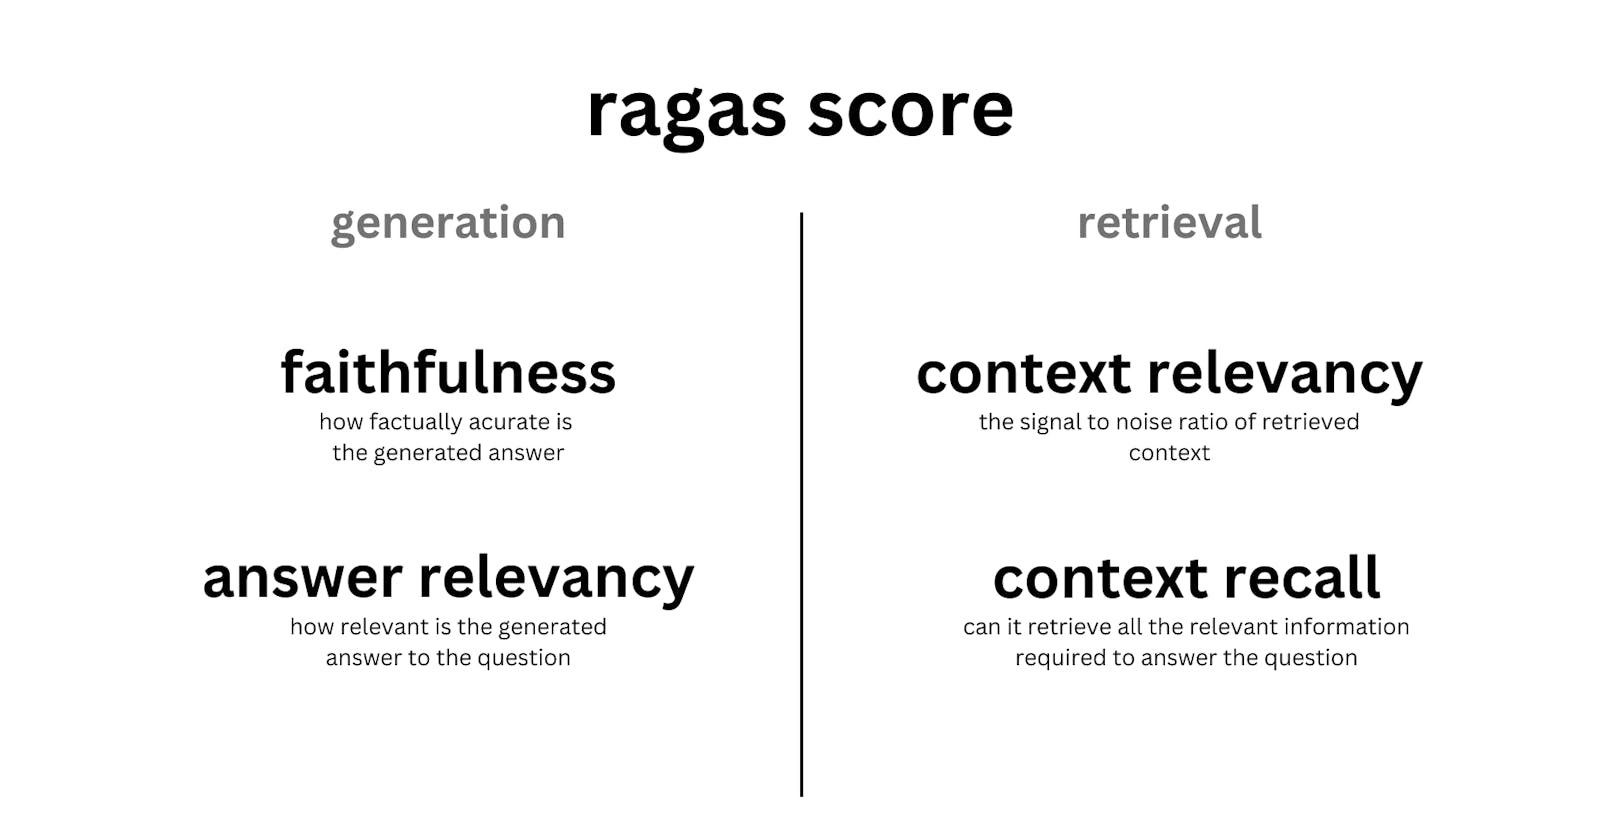 Evaluating RAG pipelines with Ragas + Langsmith